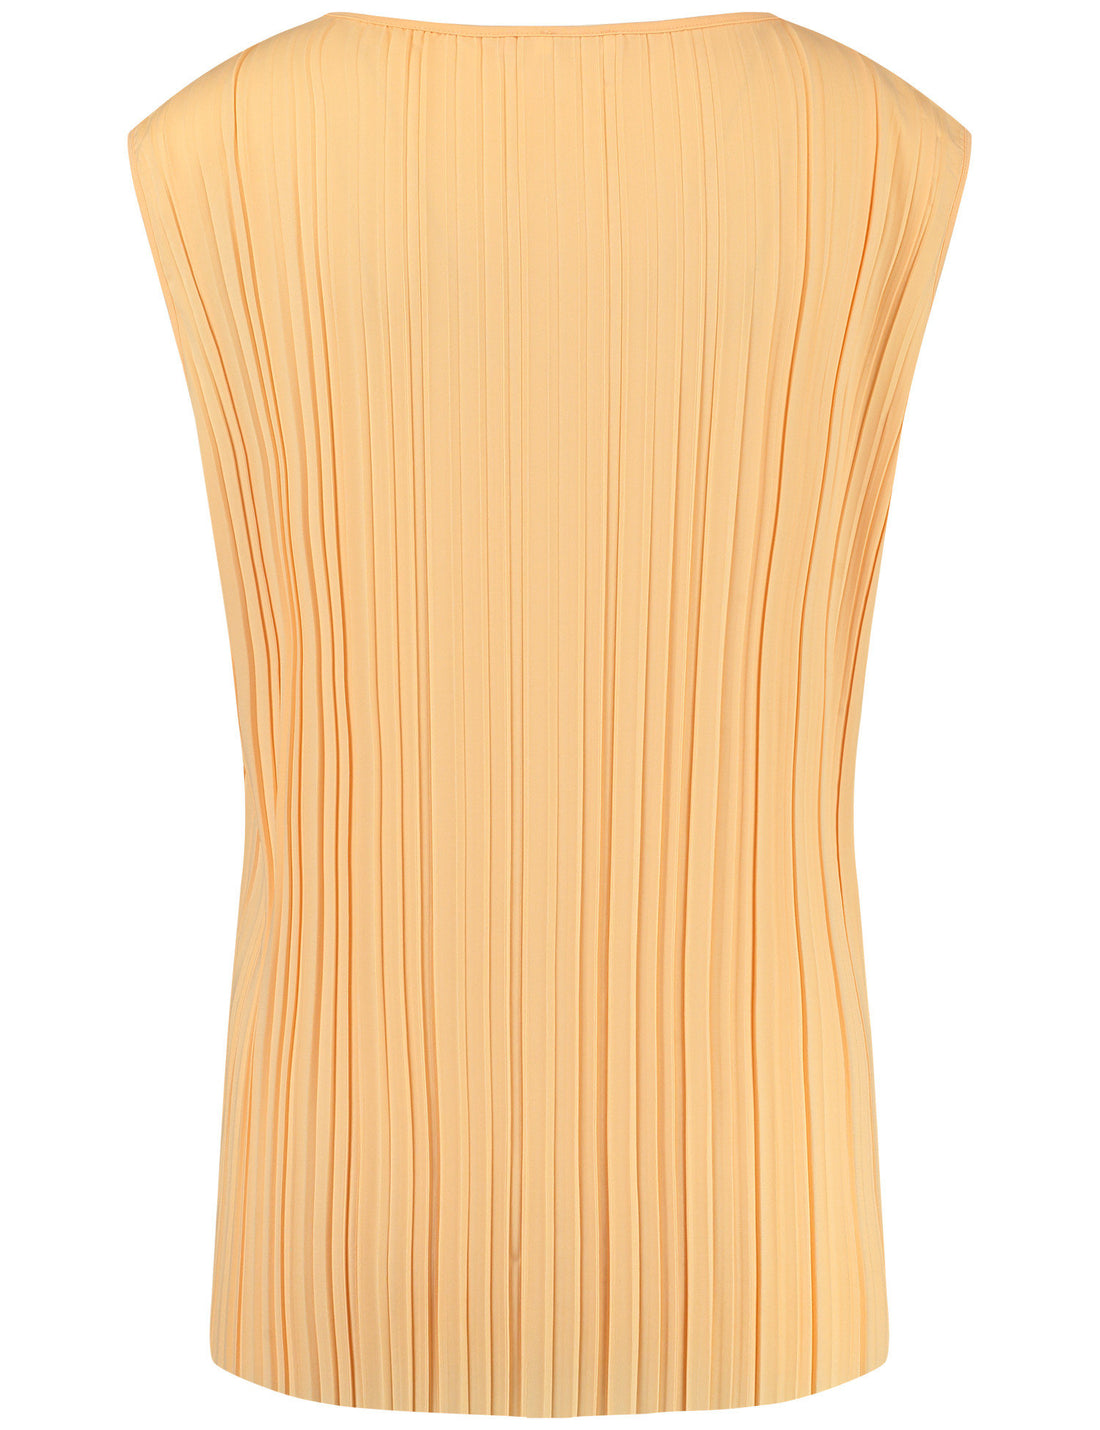 Sleeveless Pleated Blouse With Stretch For Comfort_270145-44084_60315_02